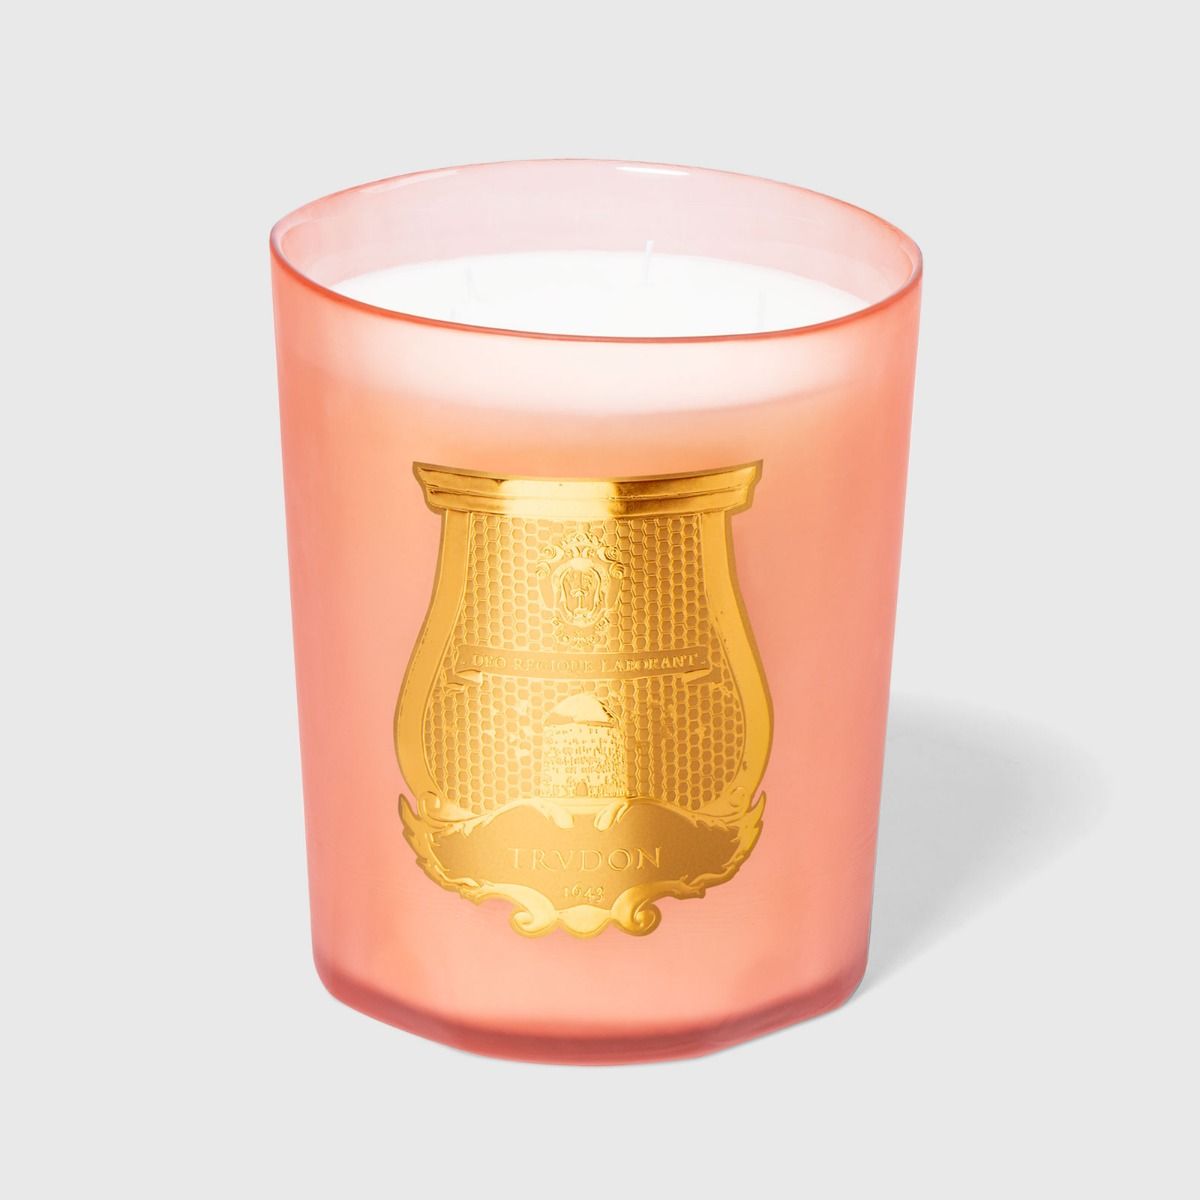 Tuileries Great Candle